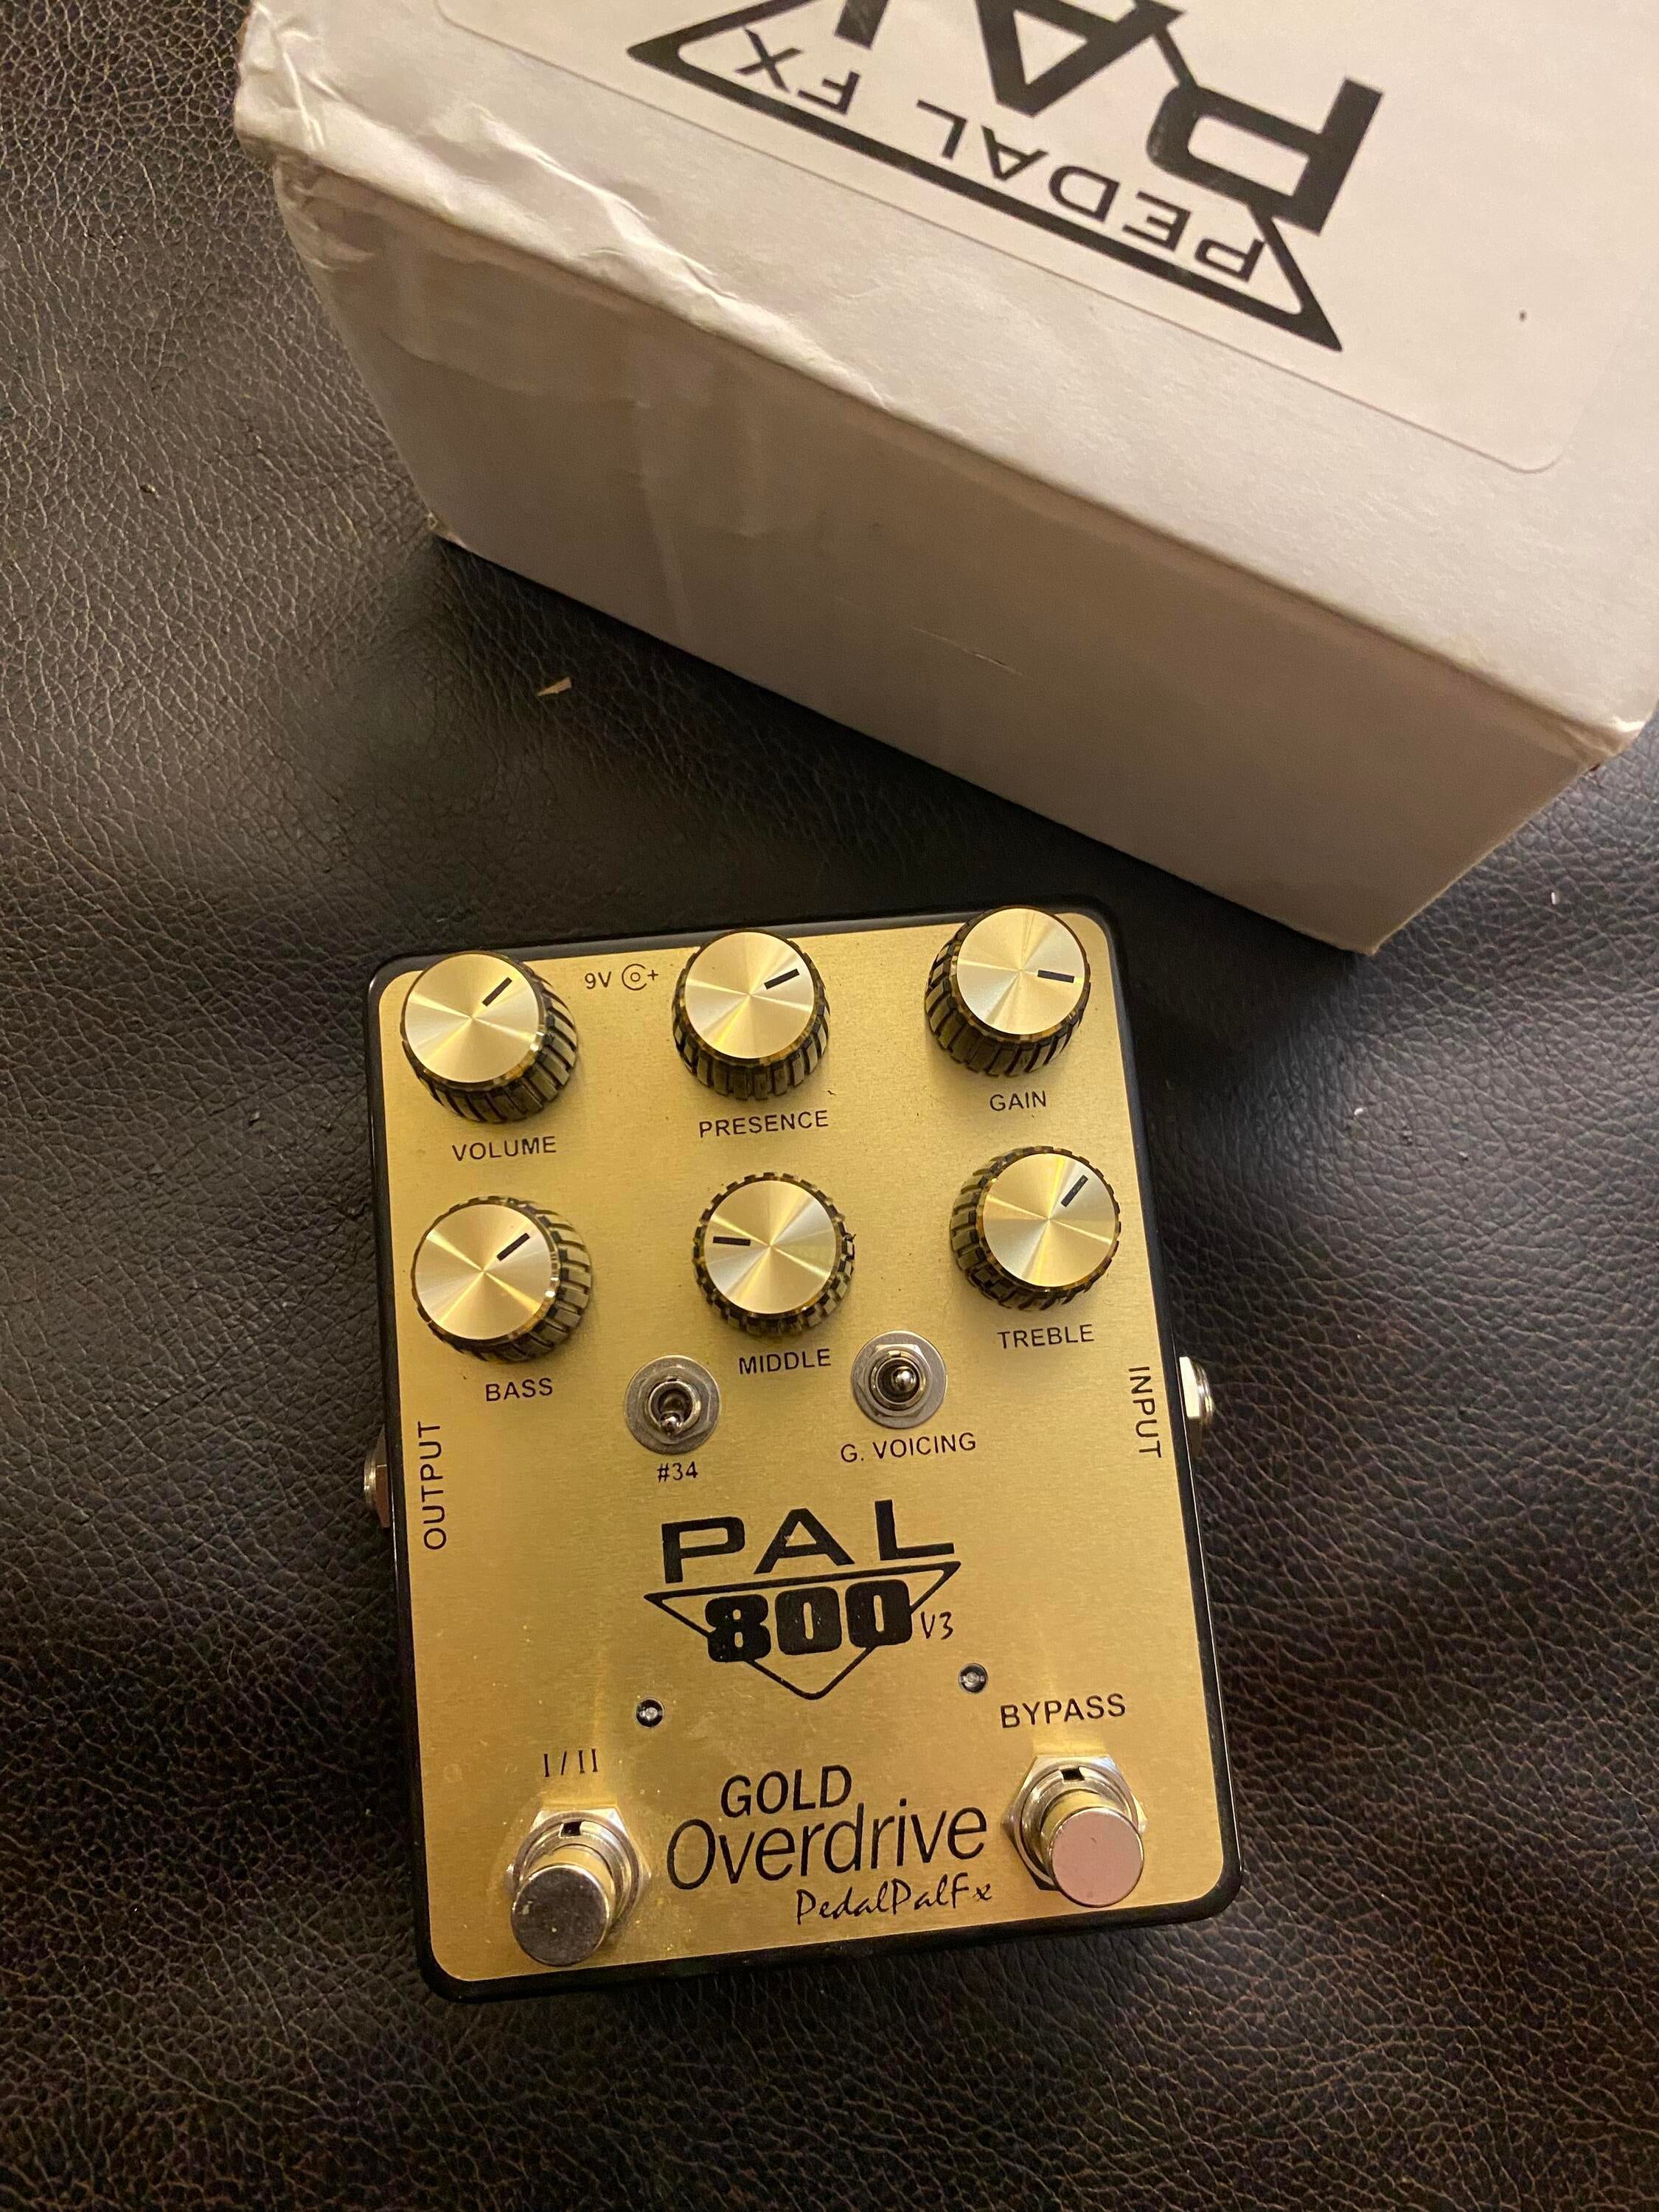 Used Pedal PAL PAL800-V3 GOLD OVERDRIVE - Sweetwater's Gear Exchange